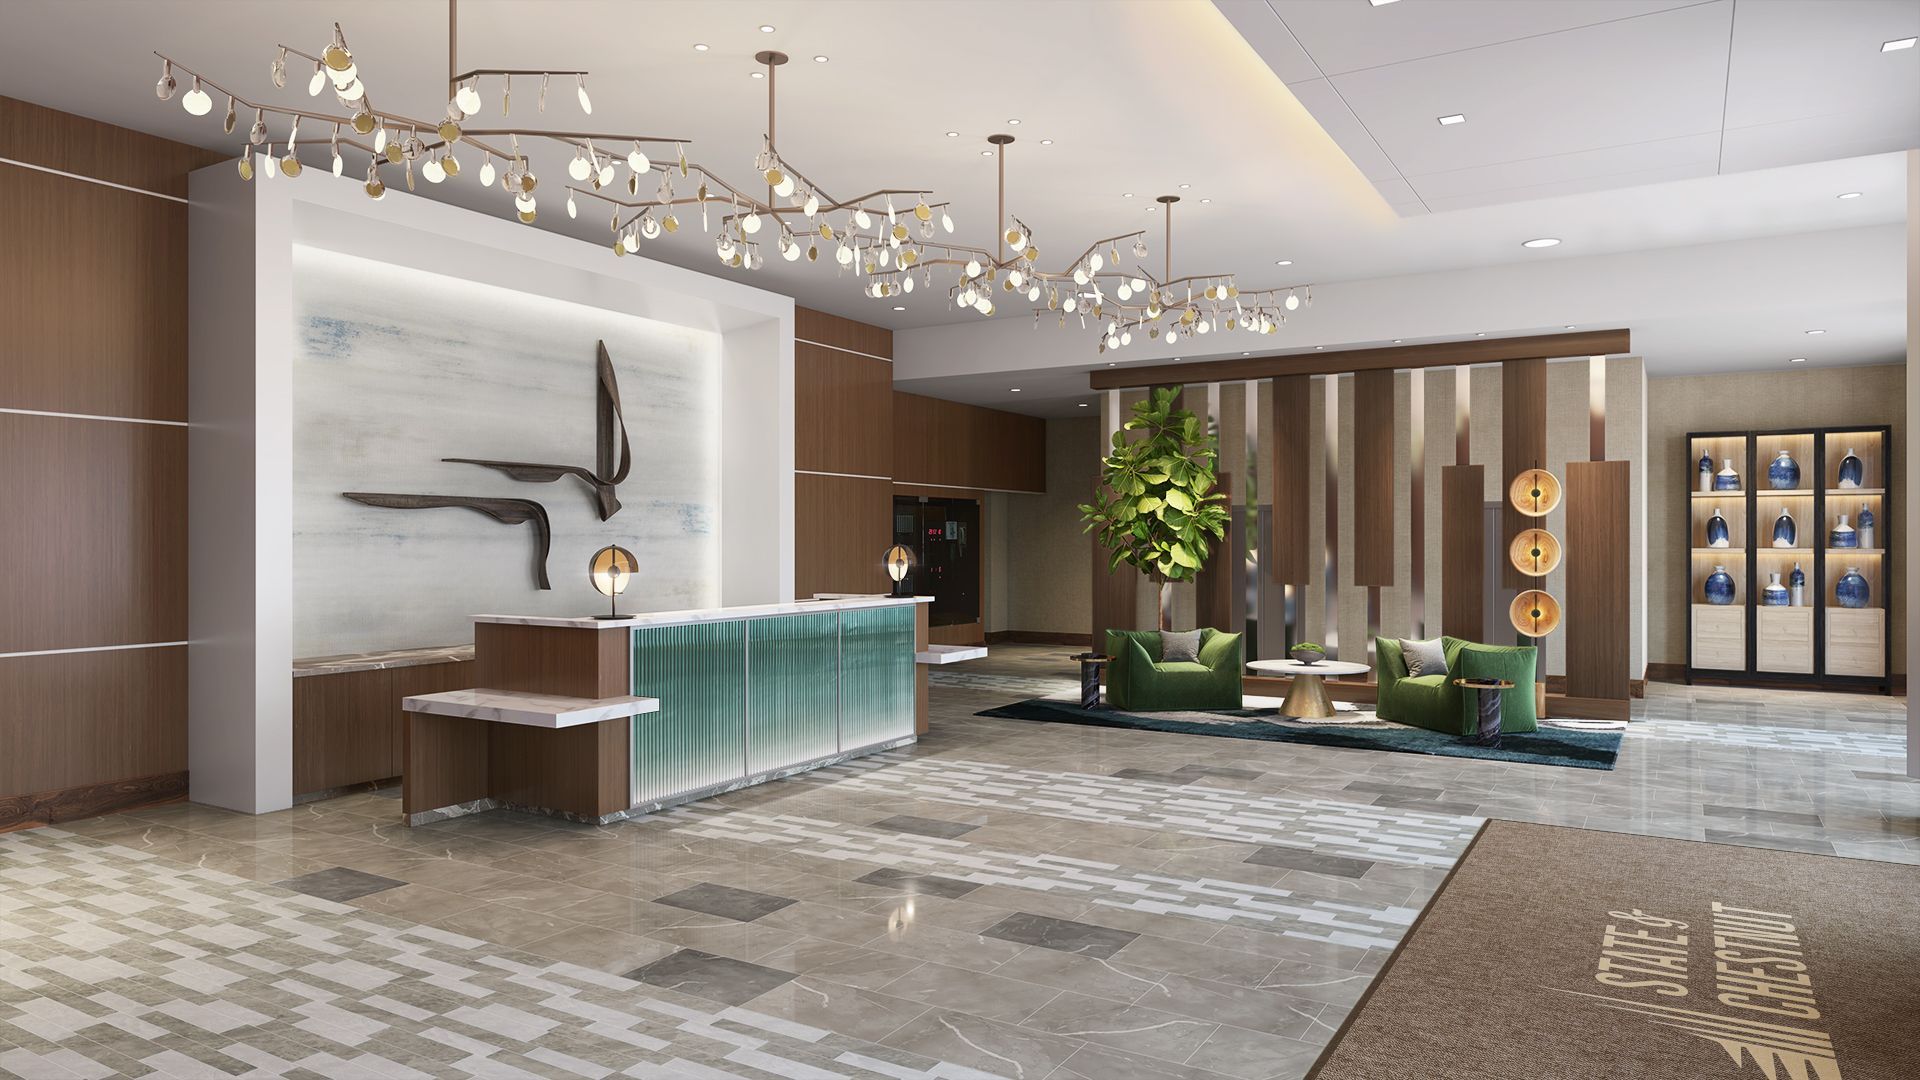 An artist 's impression of a hotel lobby with a reception desk and chairs.